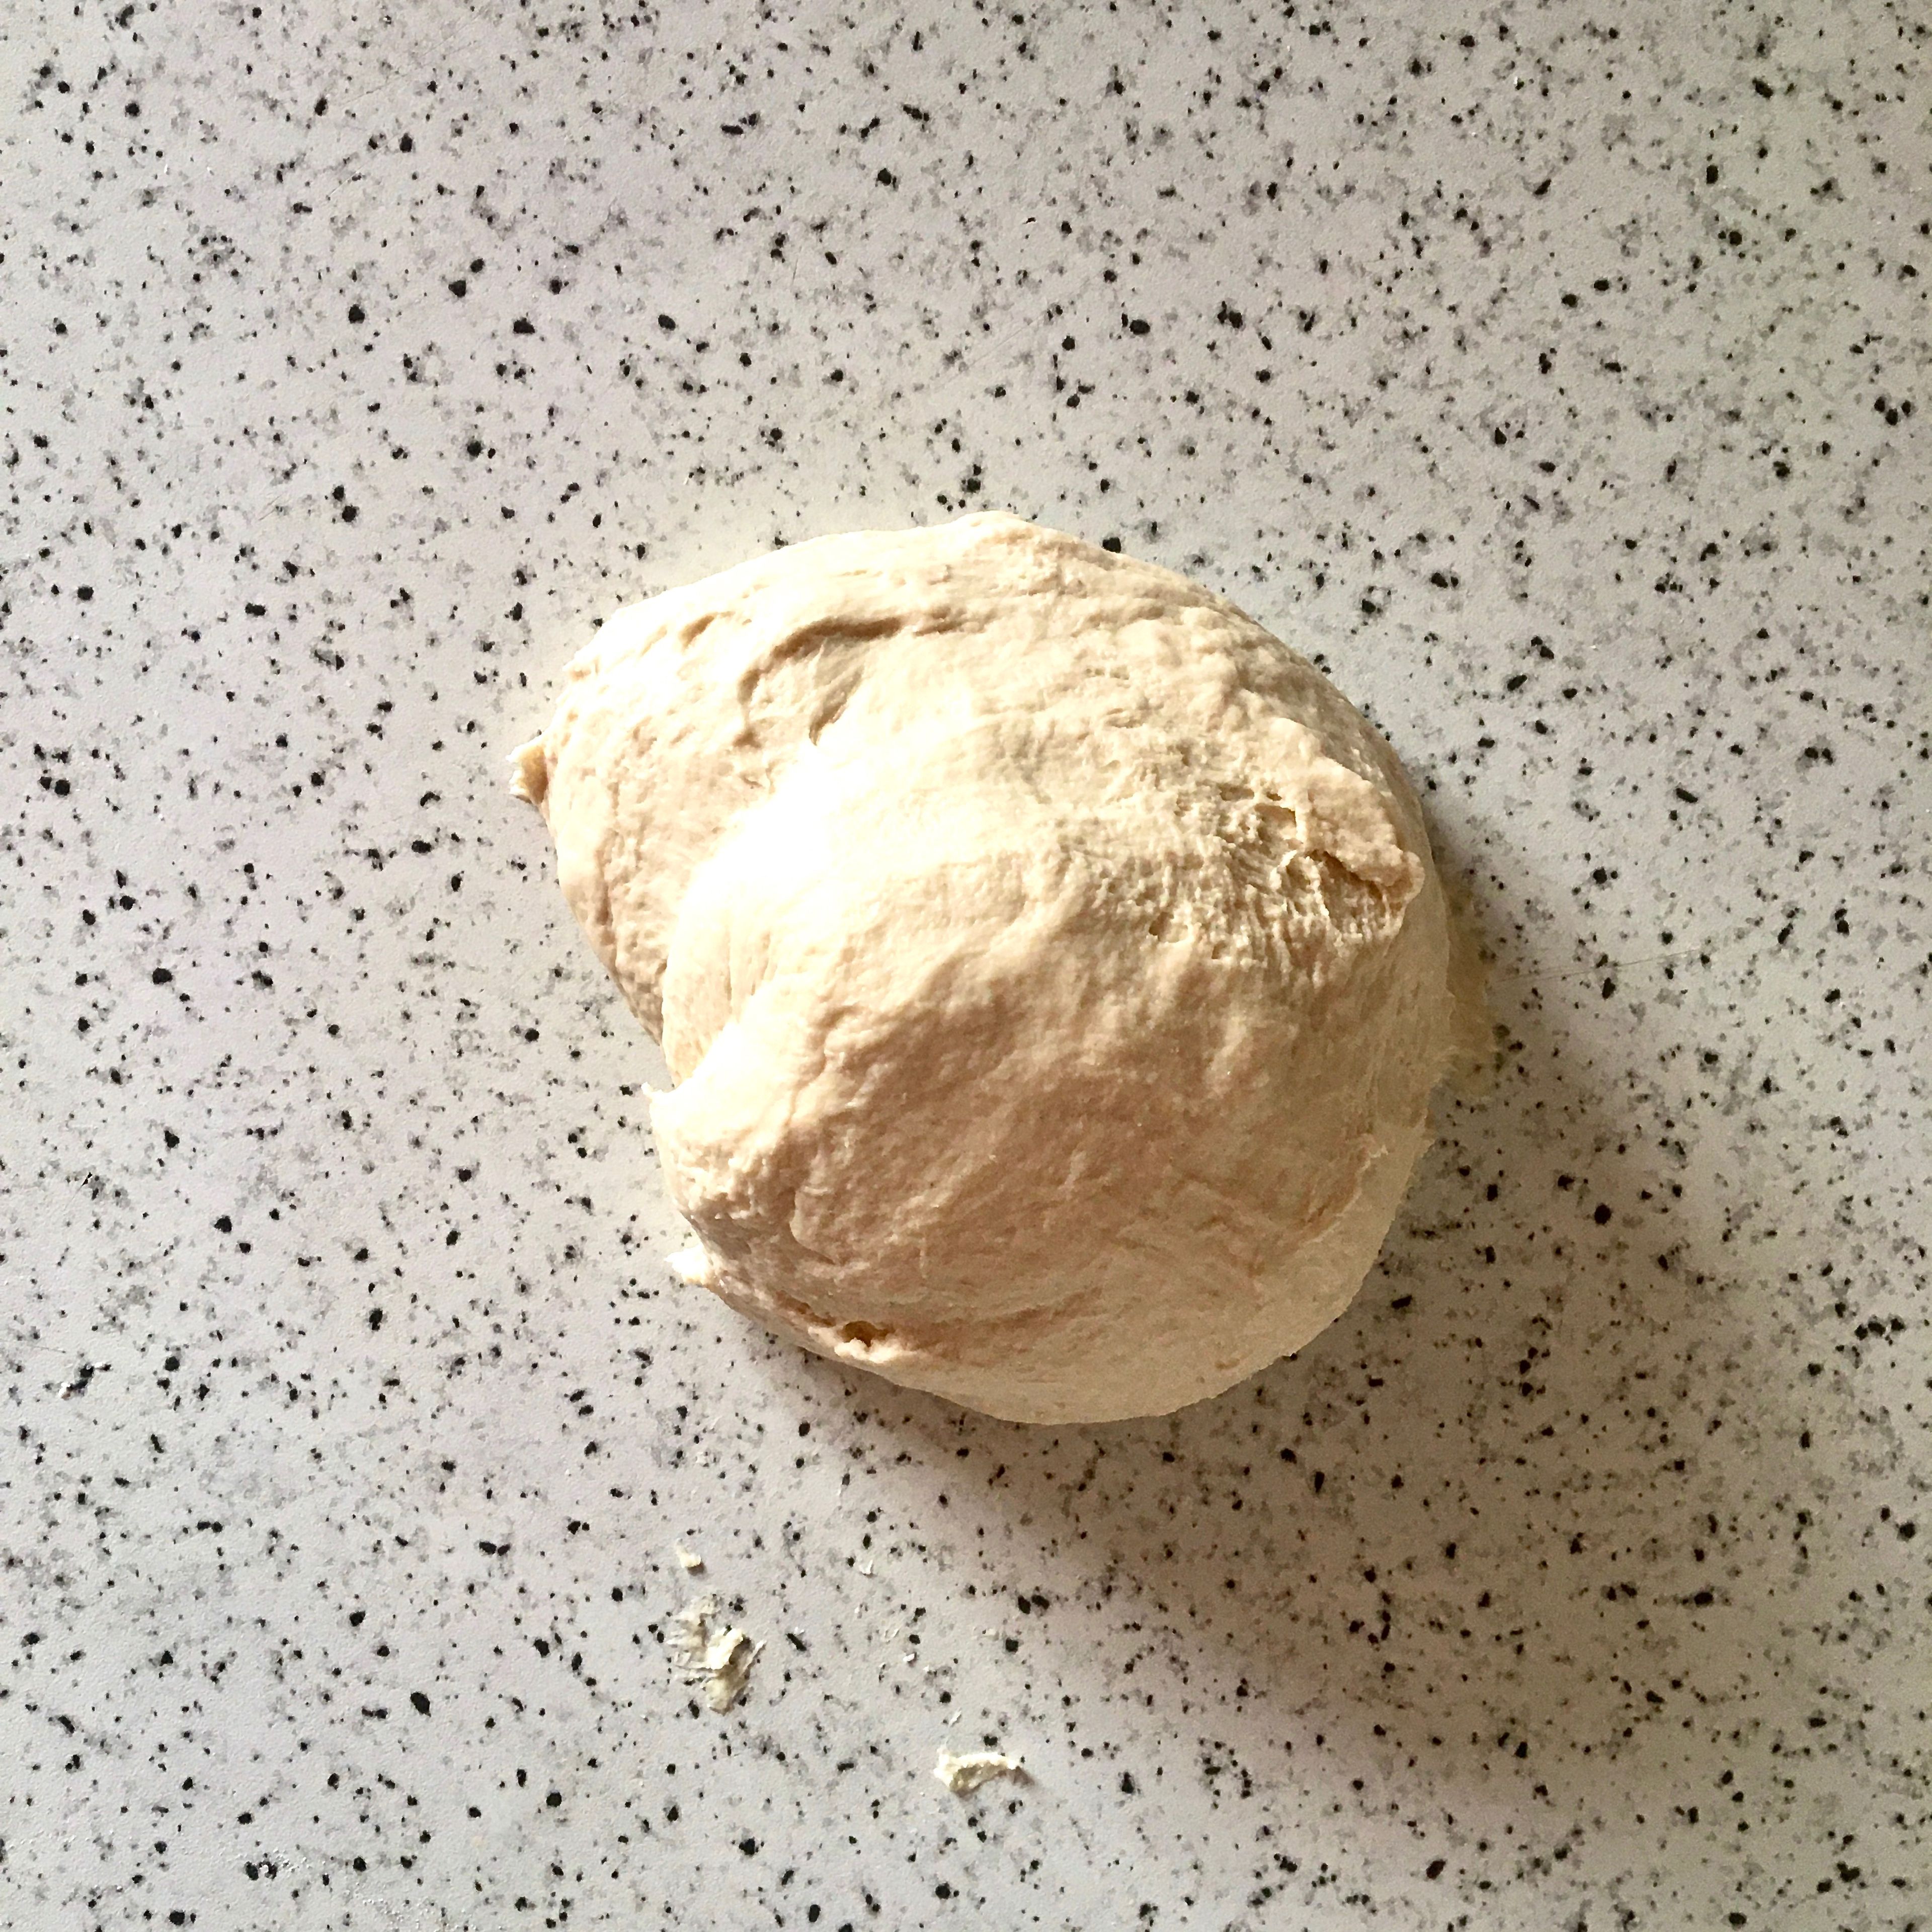 Transfer the dough onto a lightly floured surface and knead until smooth and elastic, about 8 min. If the dough seems too sticky, dust with just a little bit more flour.